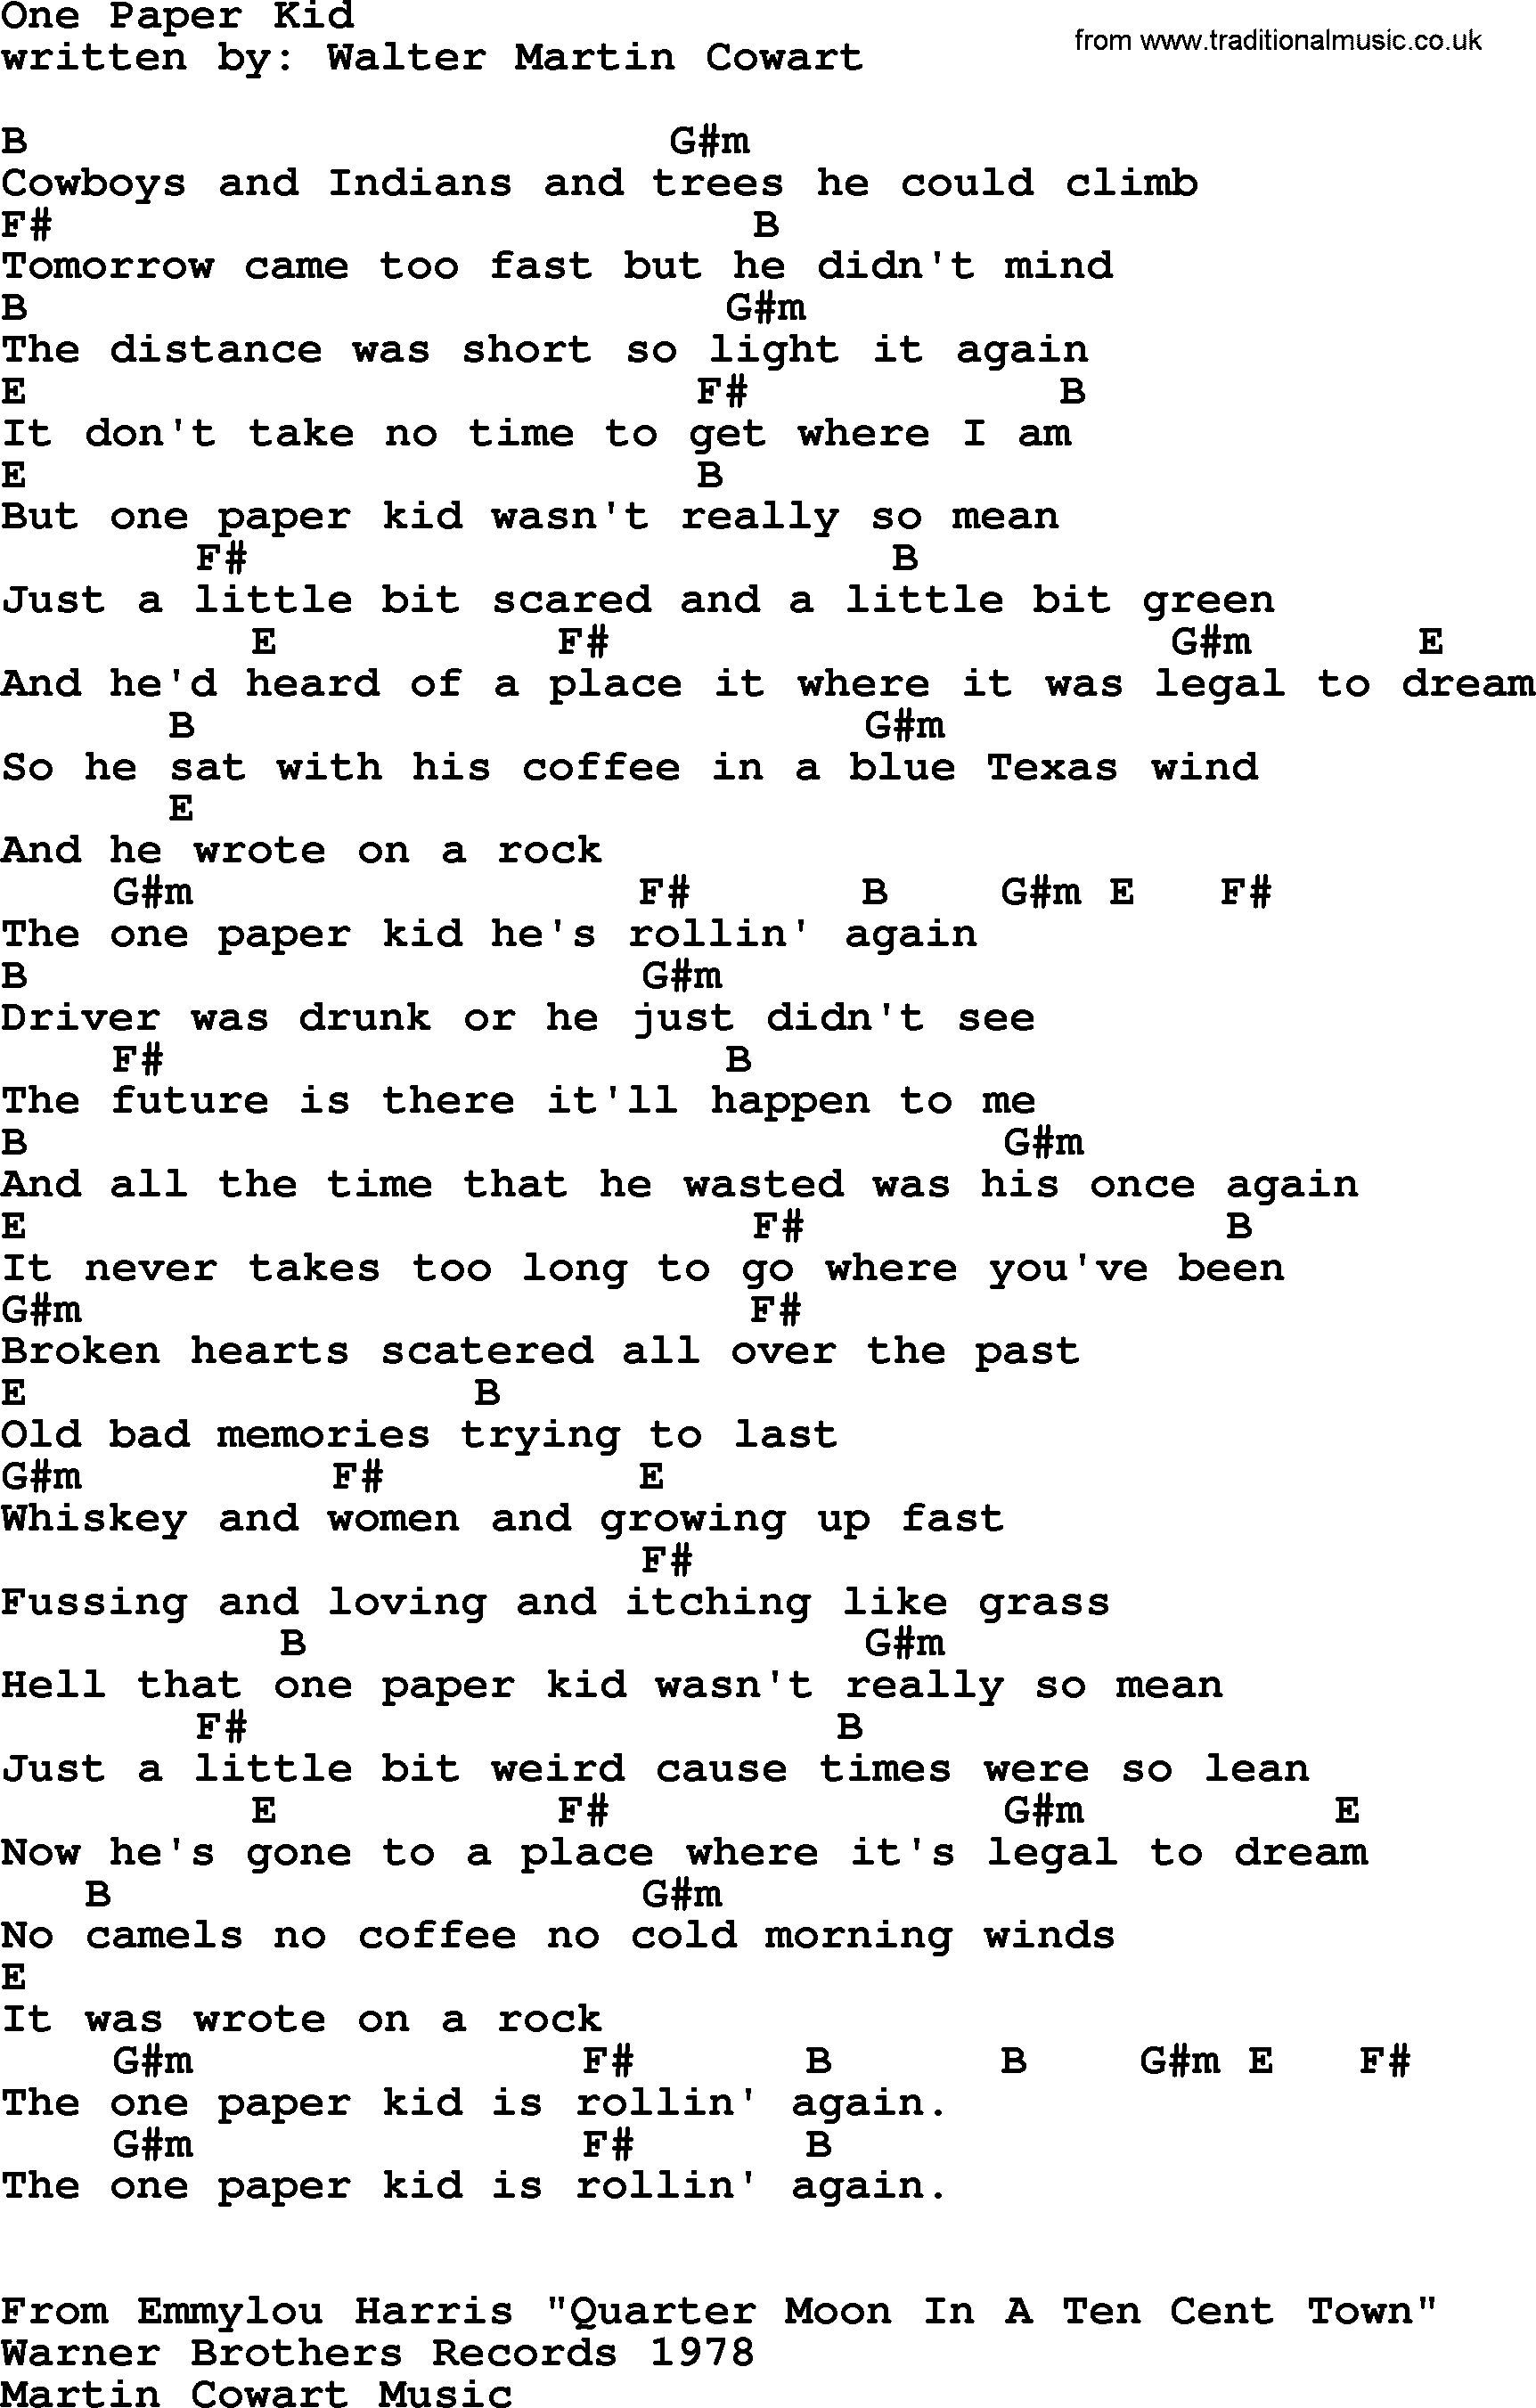 Emmylou Harris song: One Paper Kid lyrics and chords